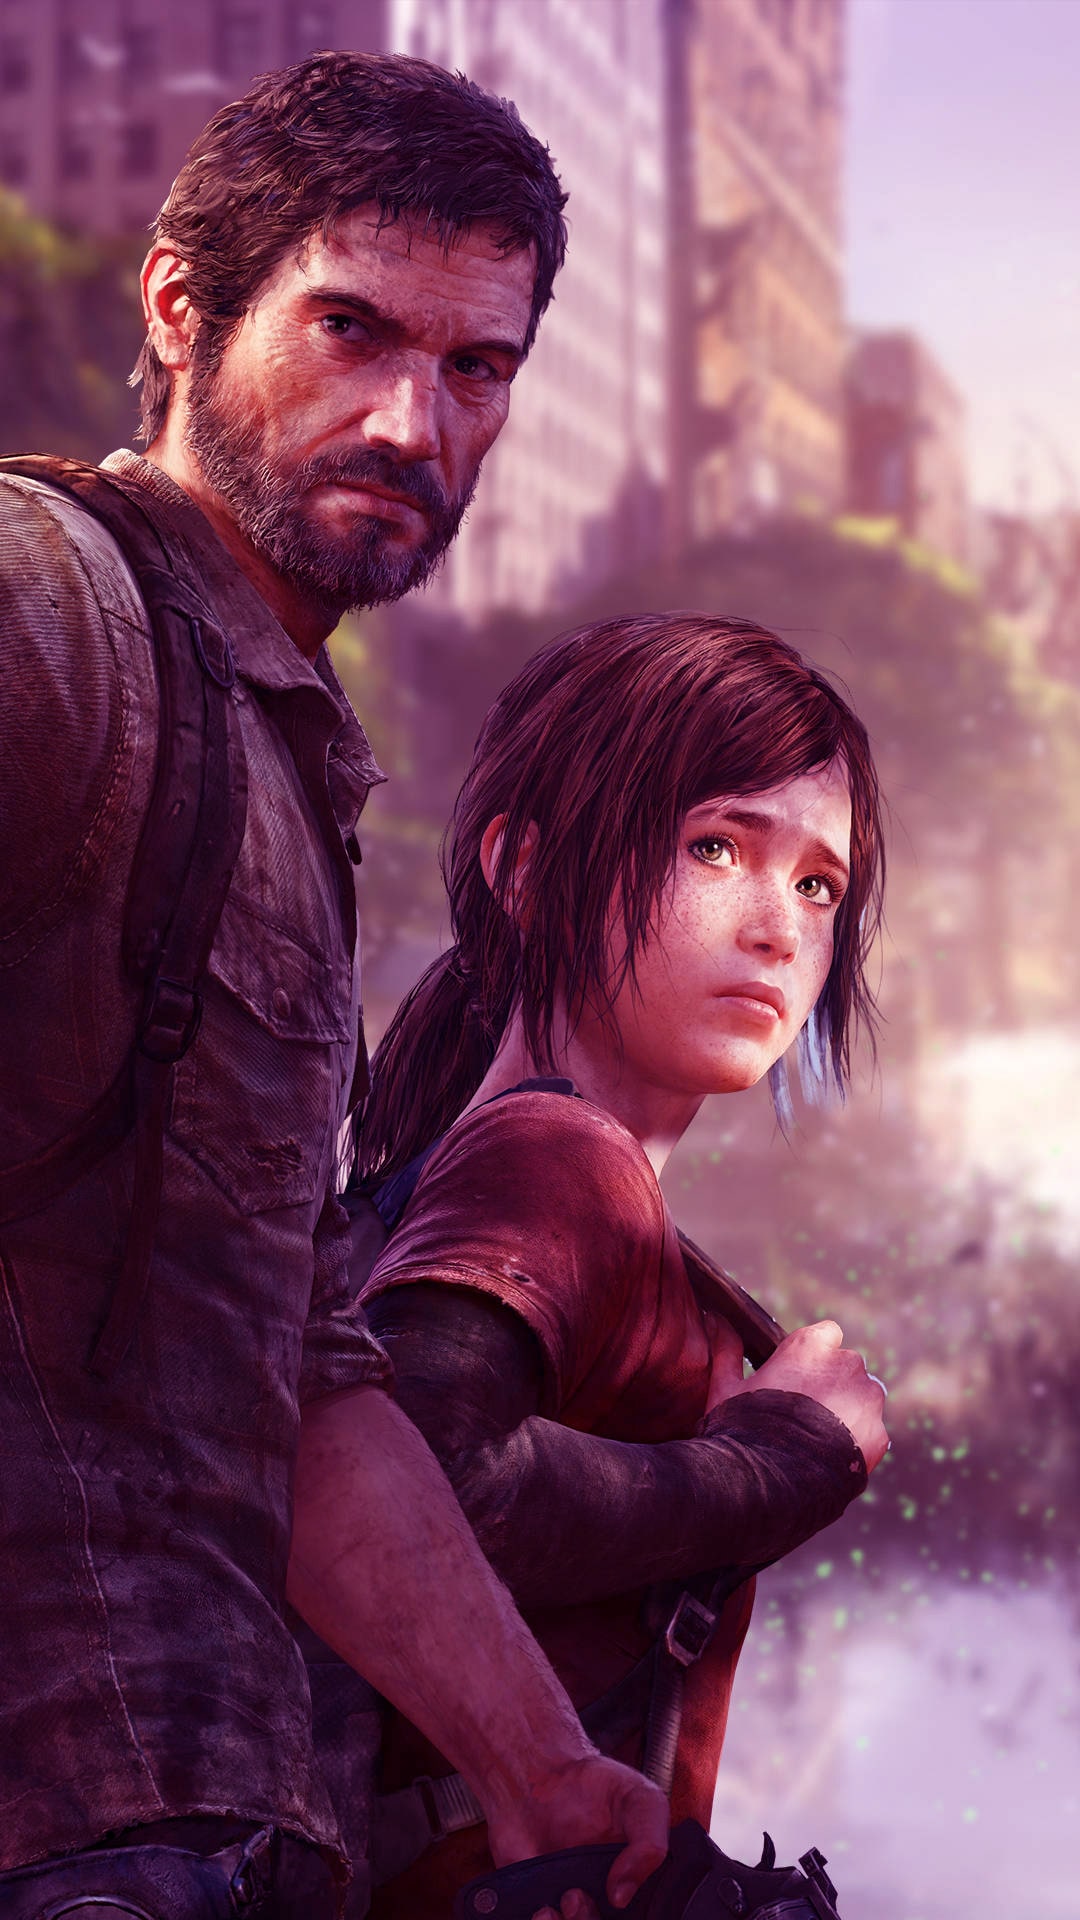 The Last of Us Wallpaper - NawPic